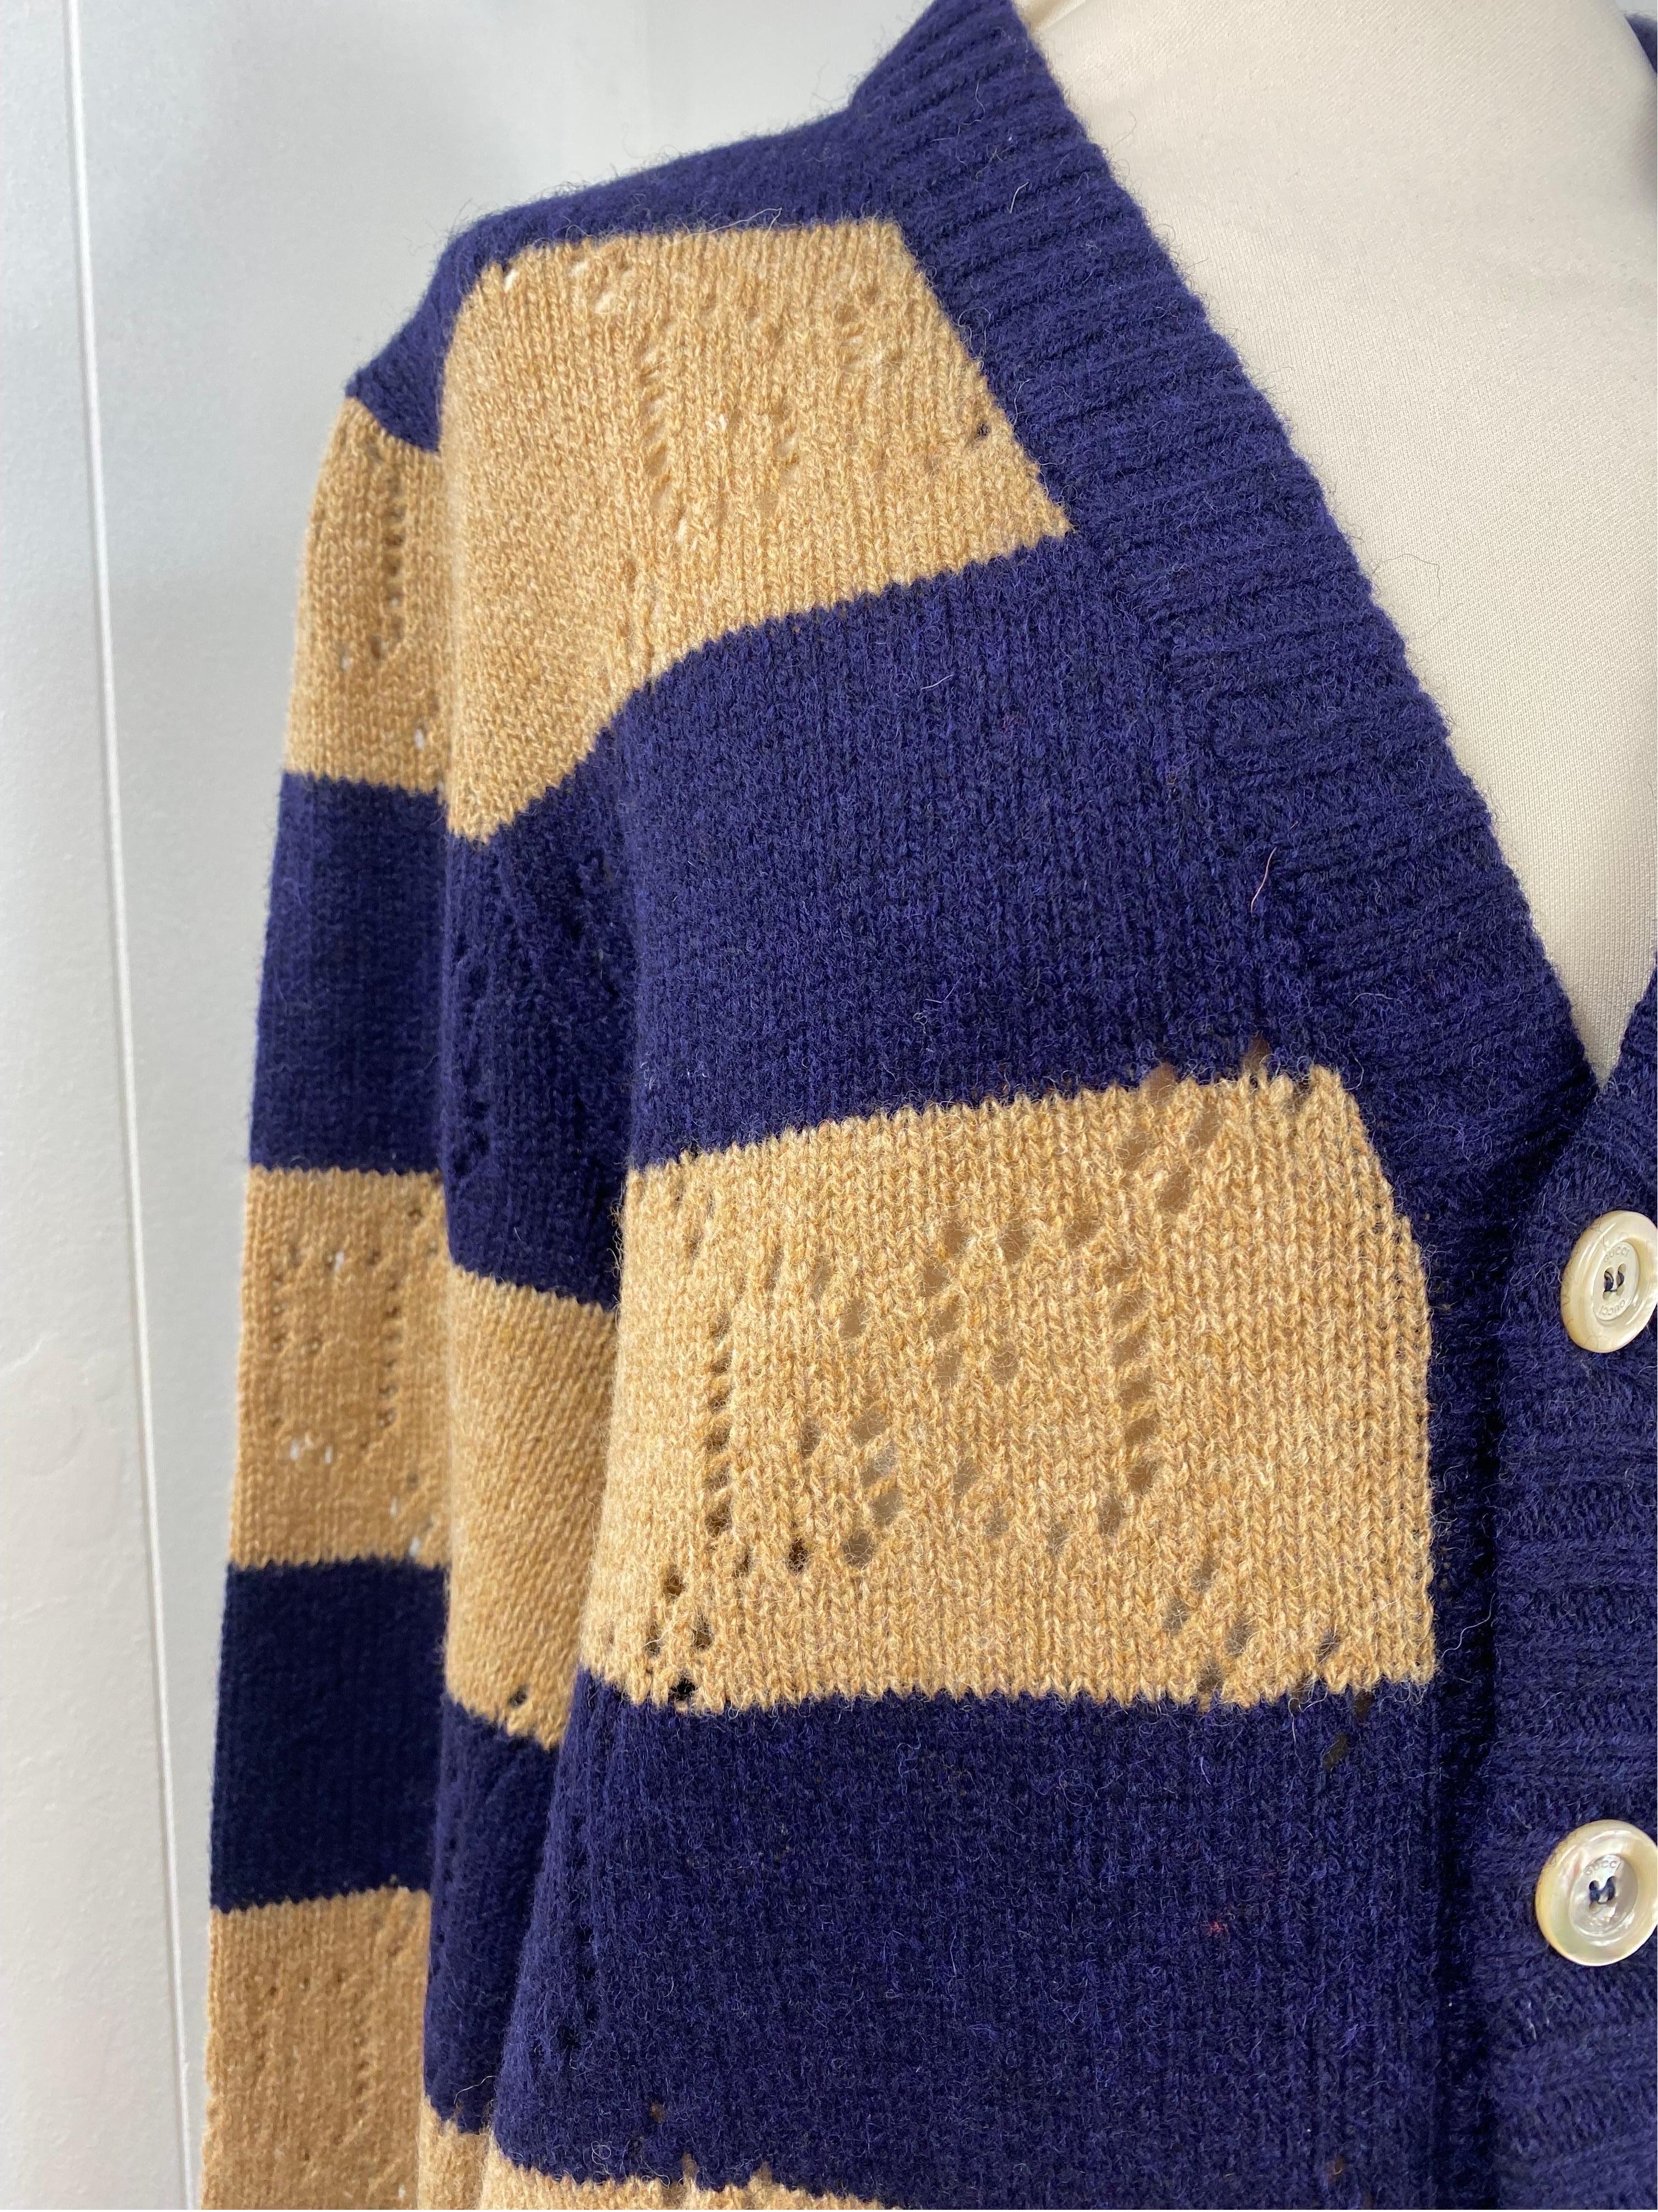 GUCCI GG CARDIGAN.
2021 collection
In wool. Striped beige and blue.
Size M.
Shoulders 44 cm
Bust 56 cm
Length 70 cm
Sleeve 68 cm
New, with tag. Never worn.
Born as a garment for men but also beautiful for women.